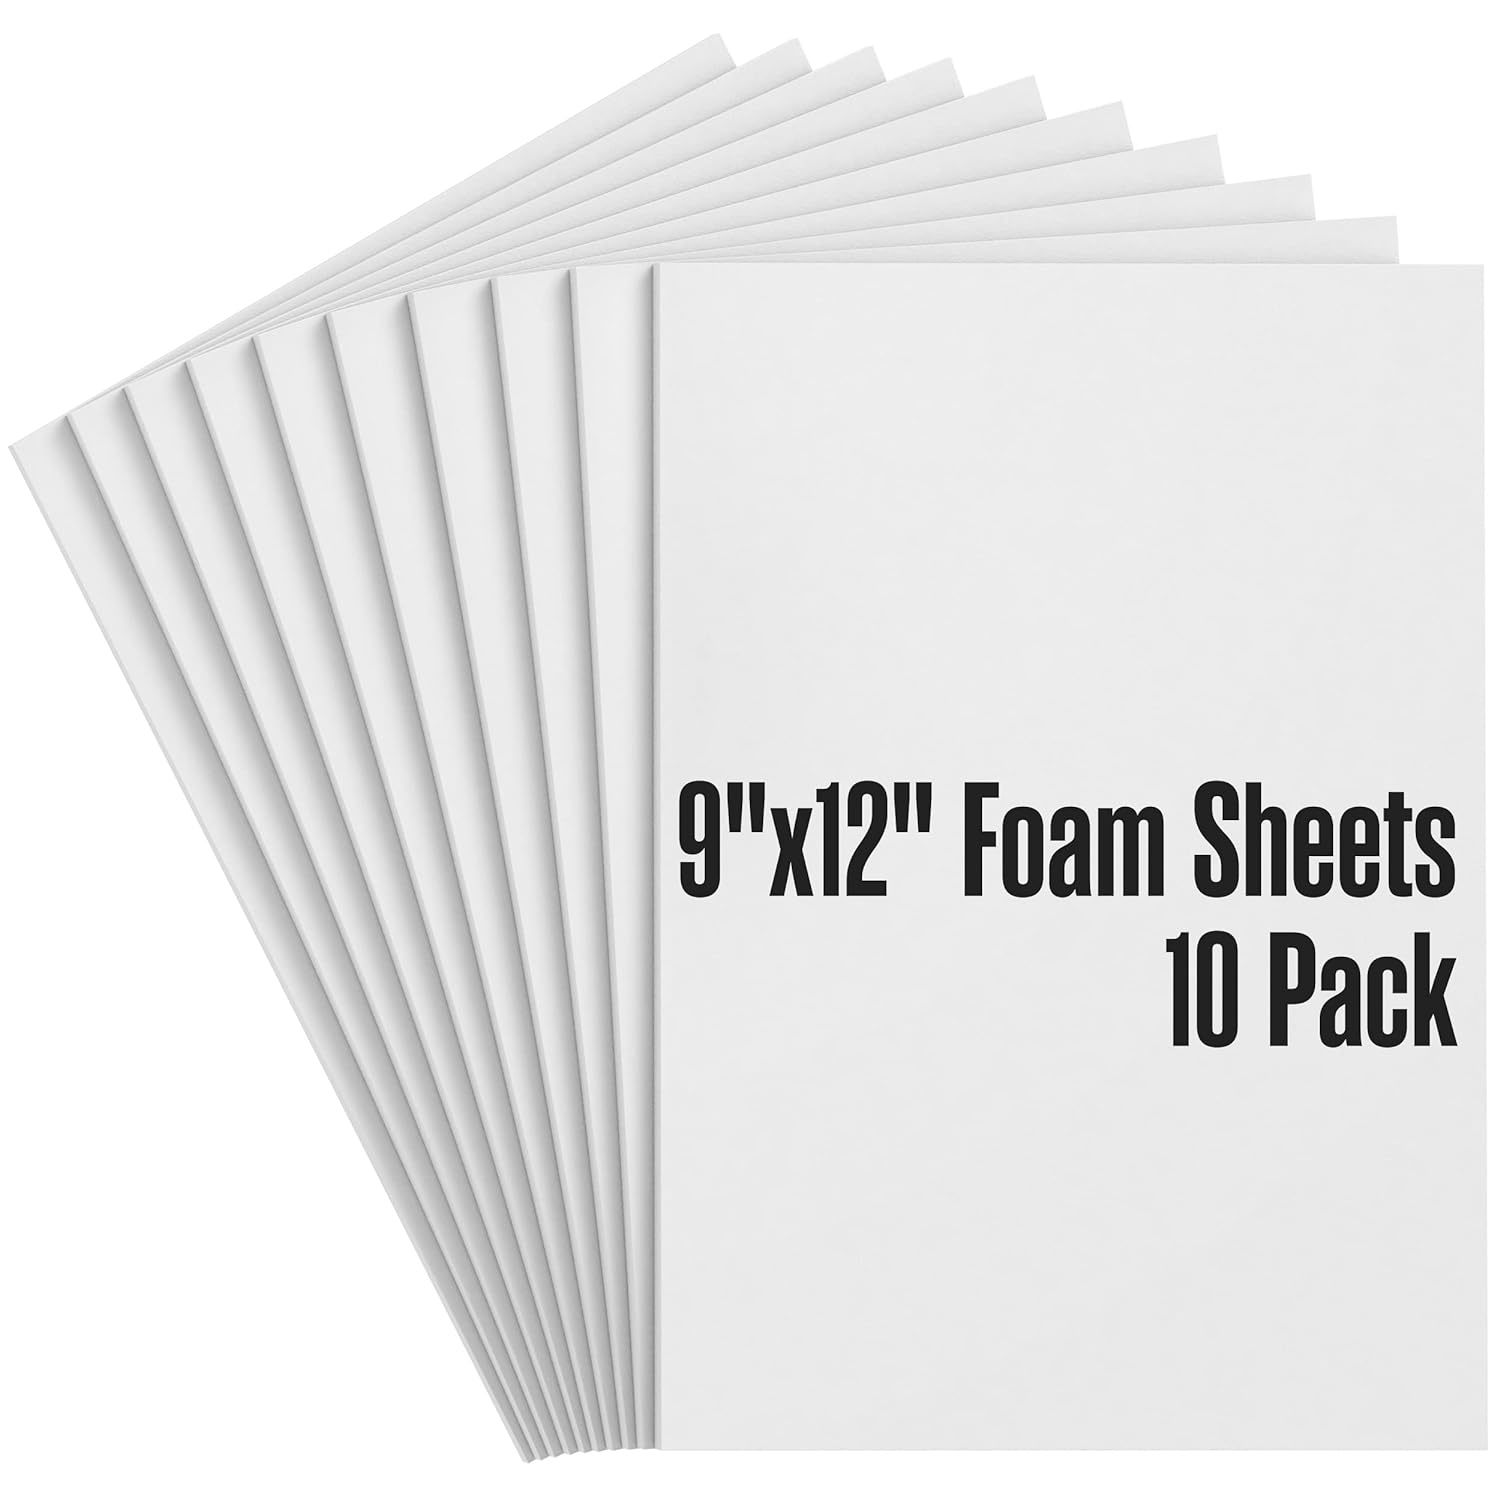 Primary image for Houseables EVA Foam Sheets, Craft, Cosplay, 6mm Thick, White, 10 Pack, 9 X 12 In